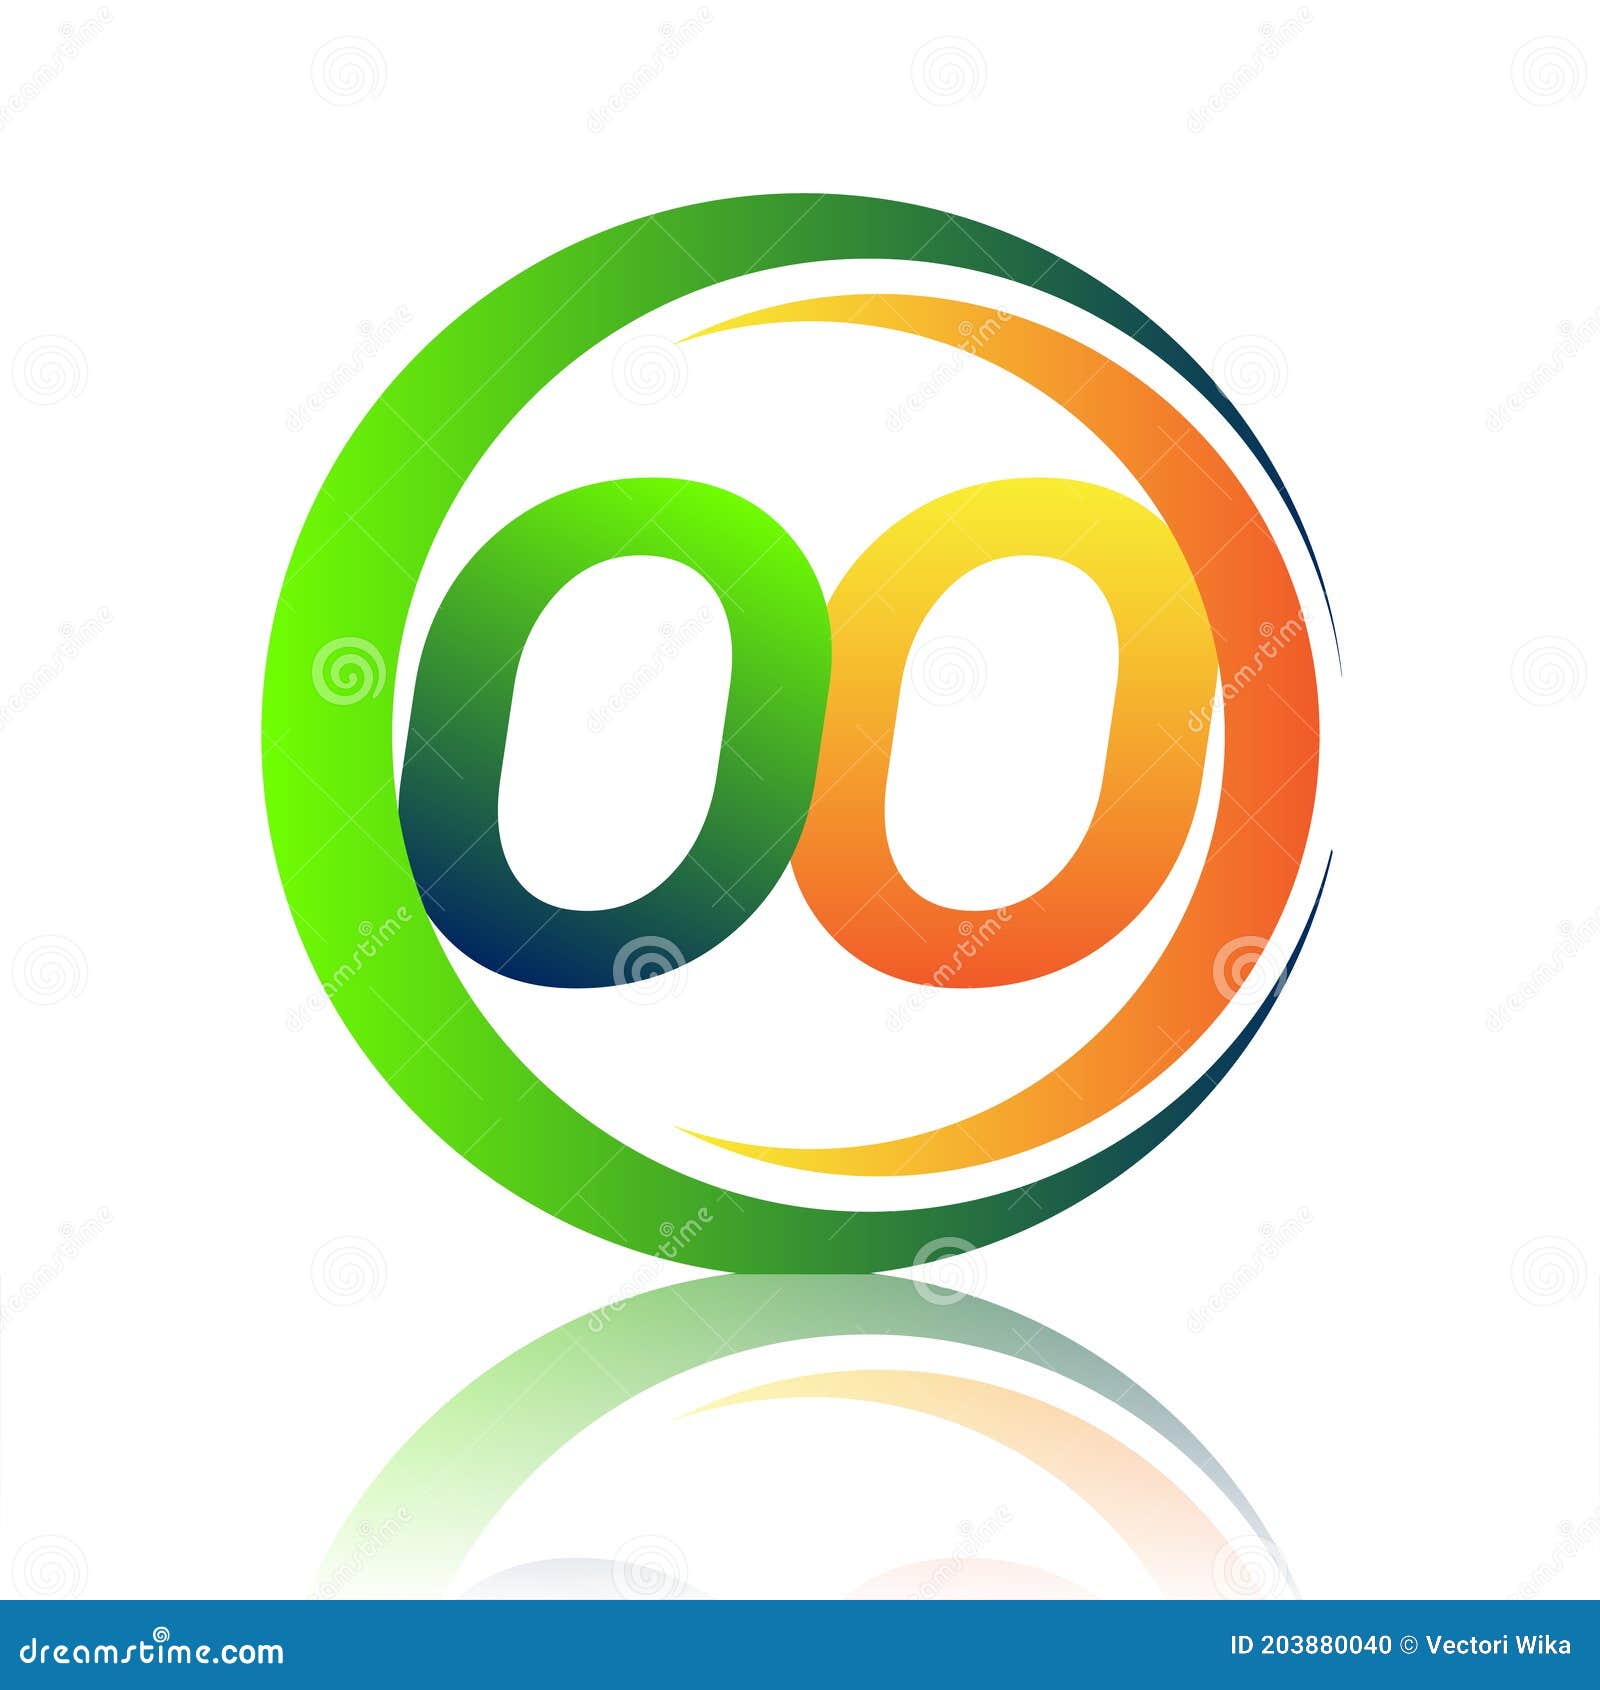 Initial Letter MM Logotype Company Name Colored Orange And Green Circle And  Swoosh Design, Modern Logo Concept. Vector Logo For Business And Company  Identity. Royalty Free SVG, Cliparts, Vectors, and Stock Illustration.